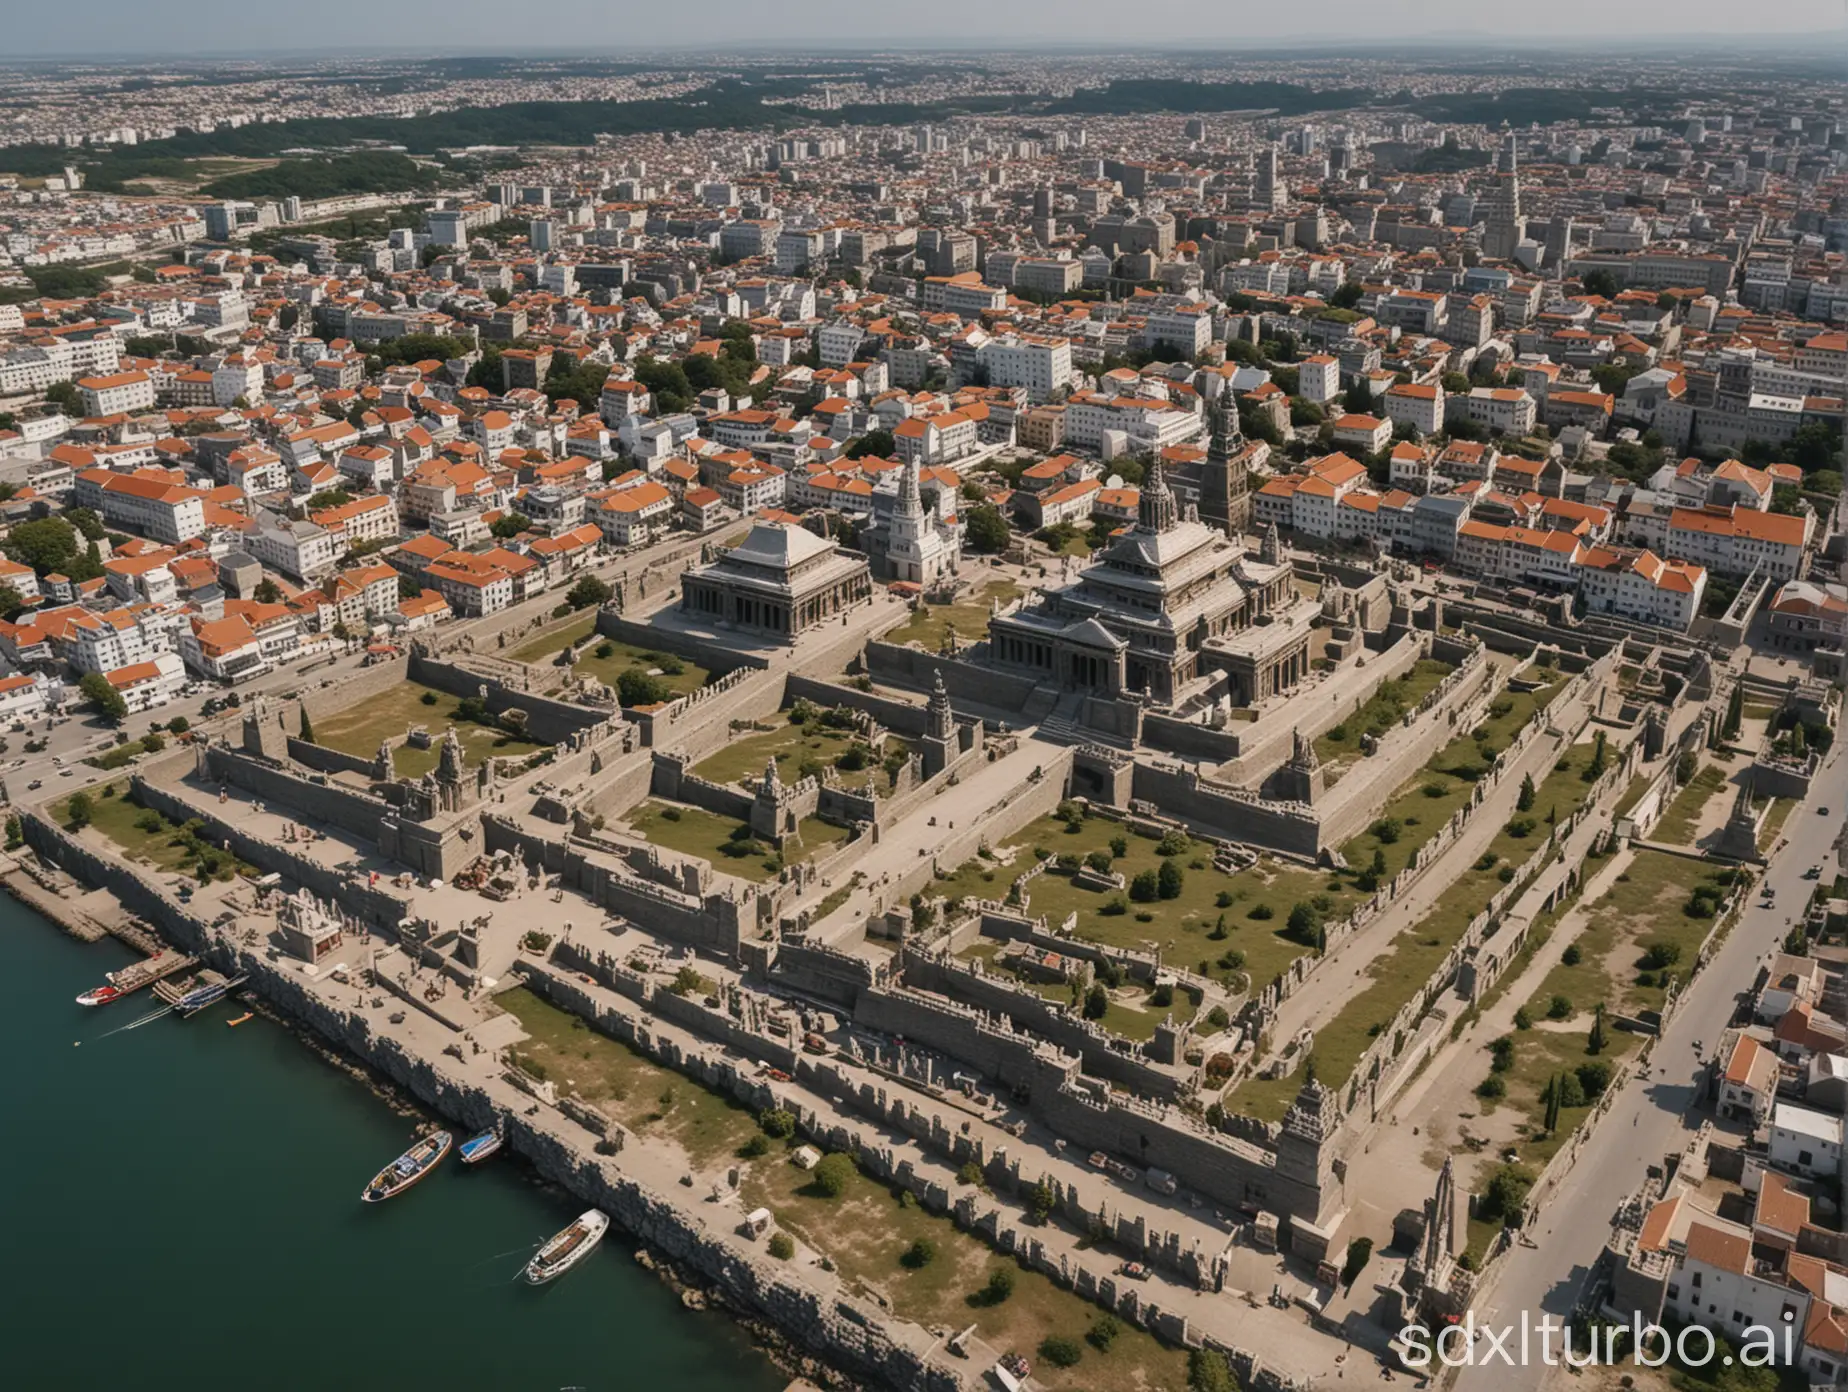 Medieval-City-Harbor-Temple-Complex-Aerial-View